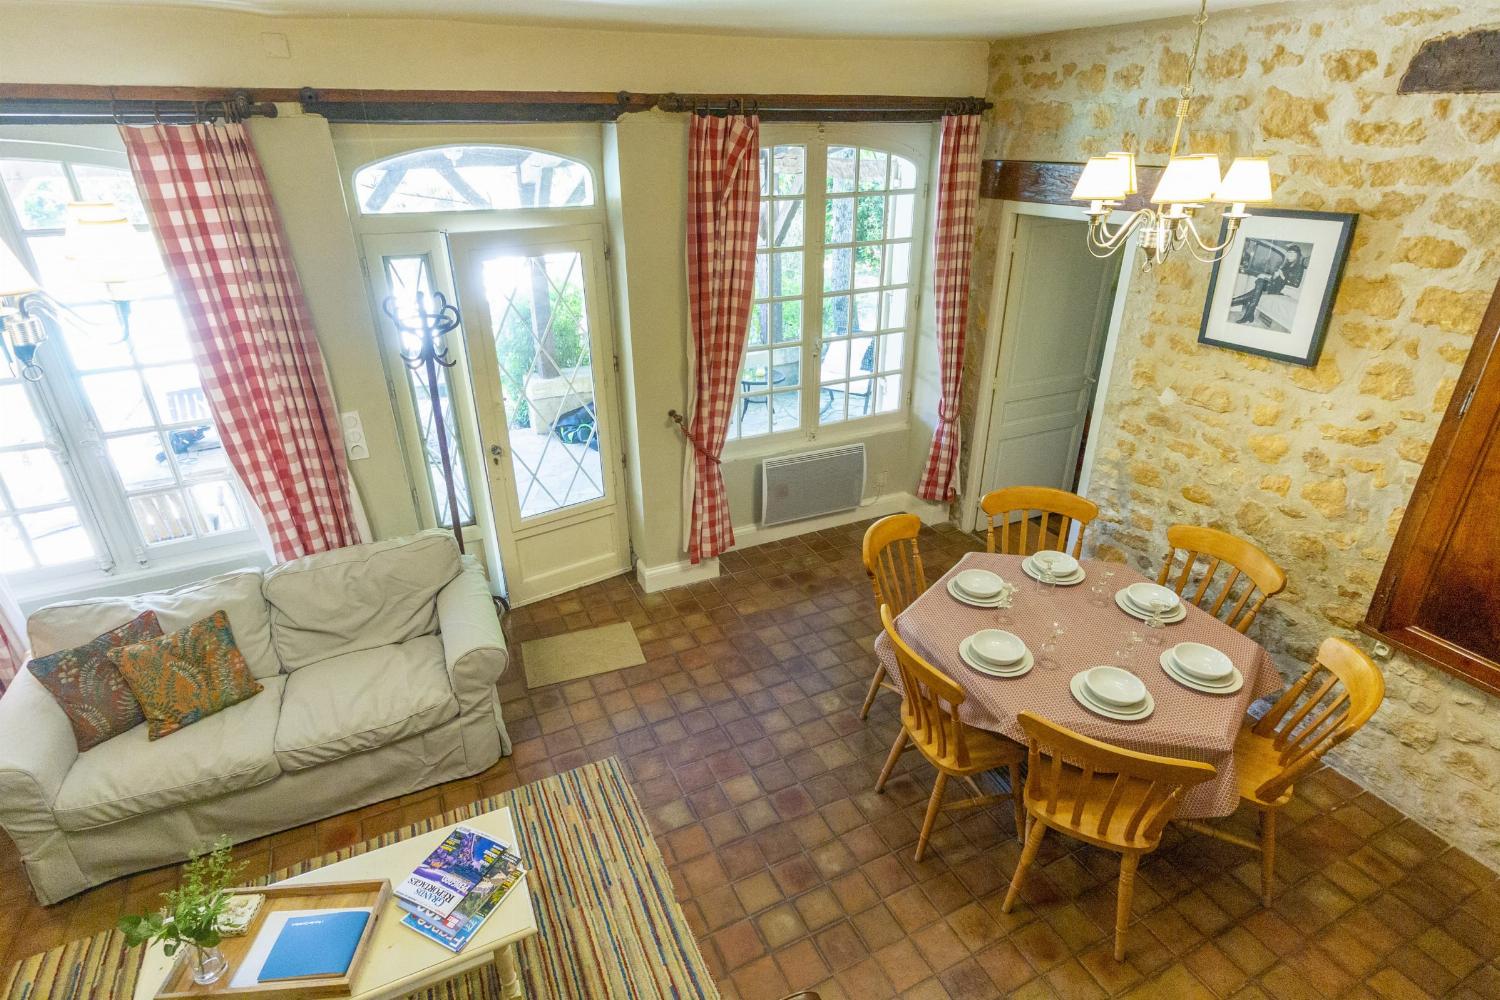 Dining room | Holiday home in Sarlat-la-Canéda